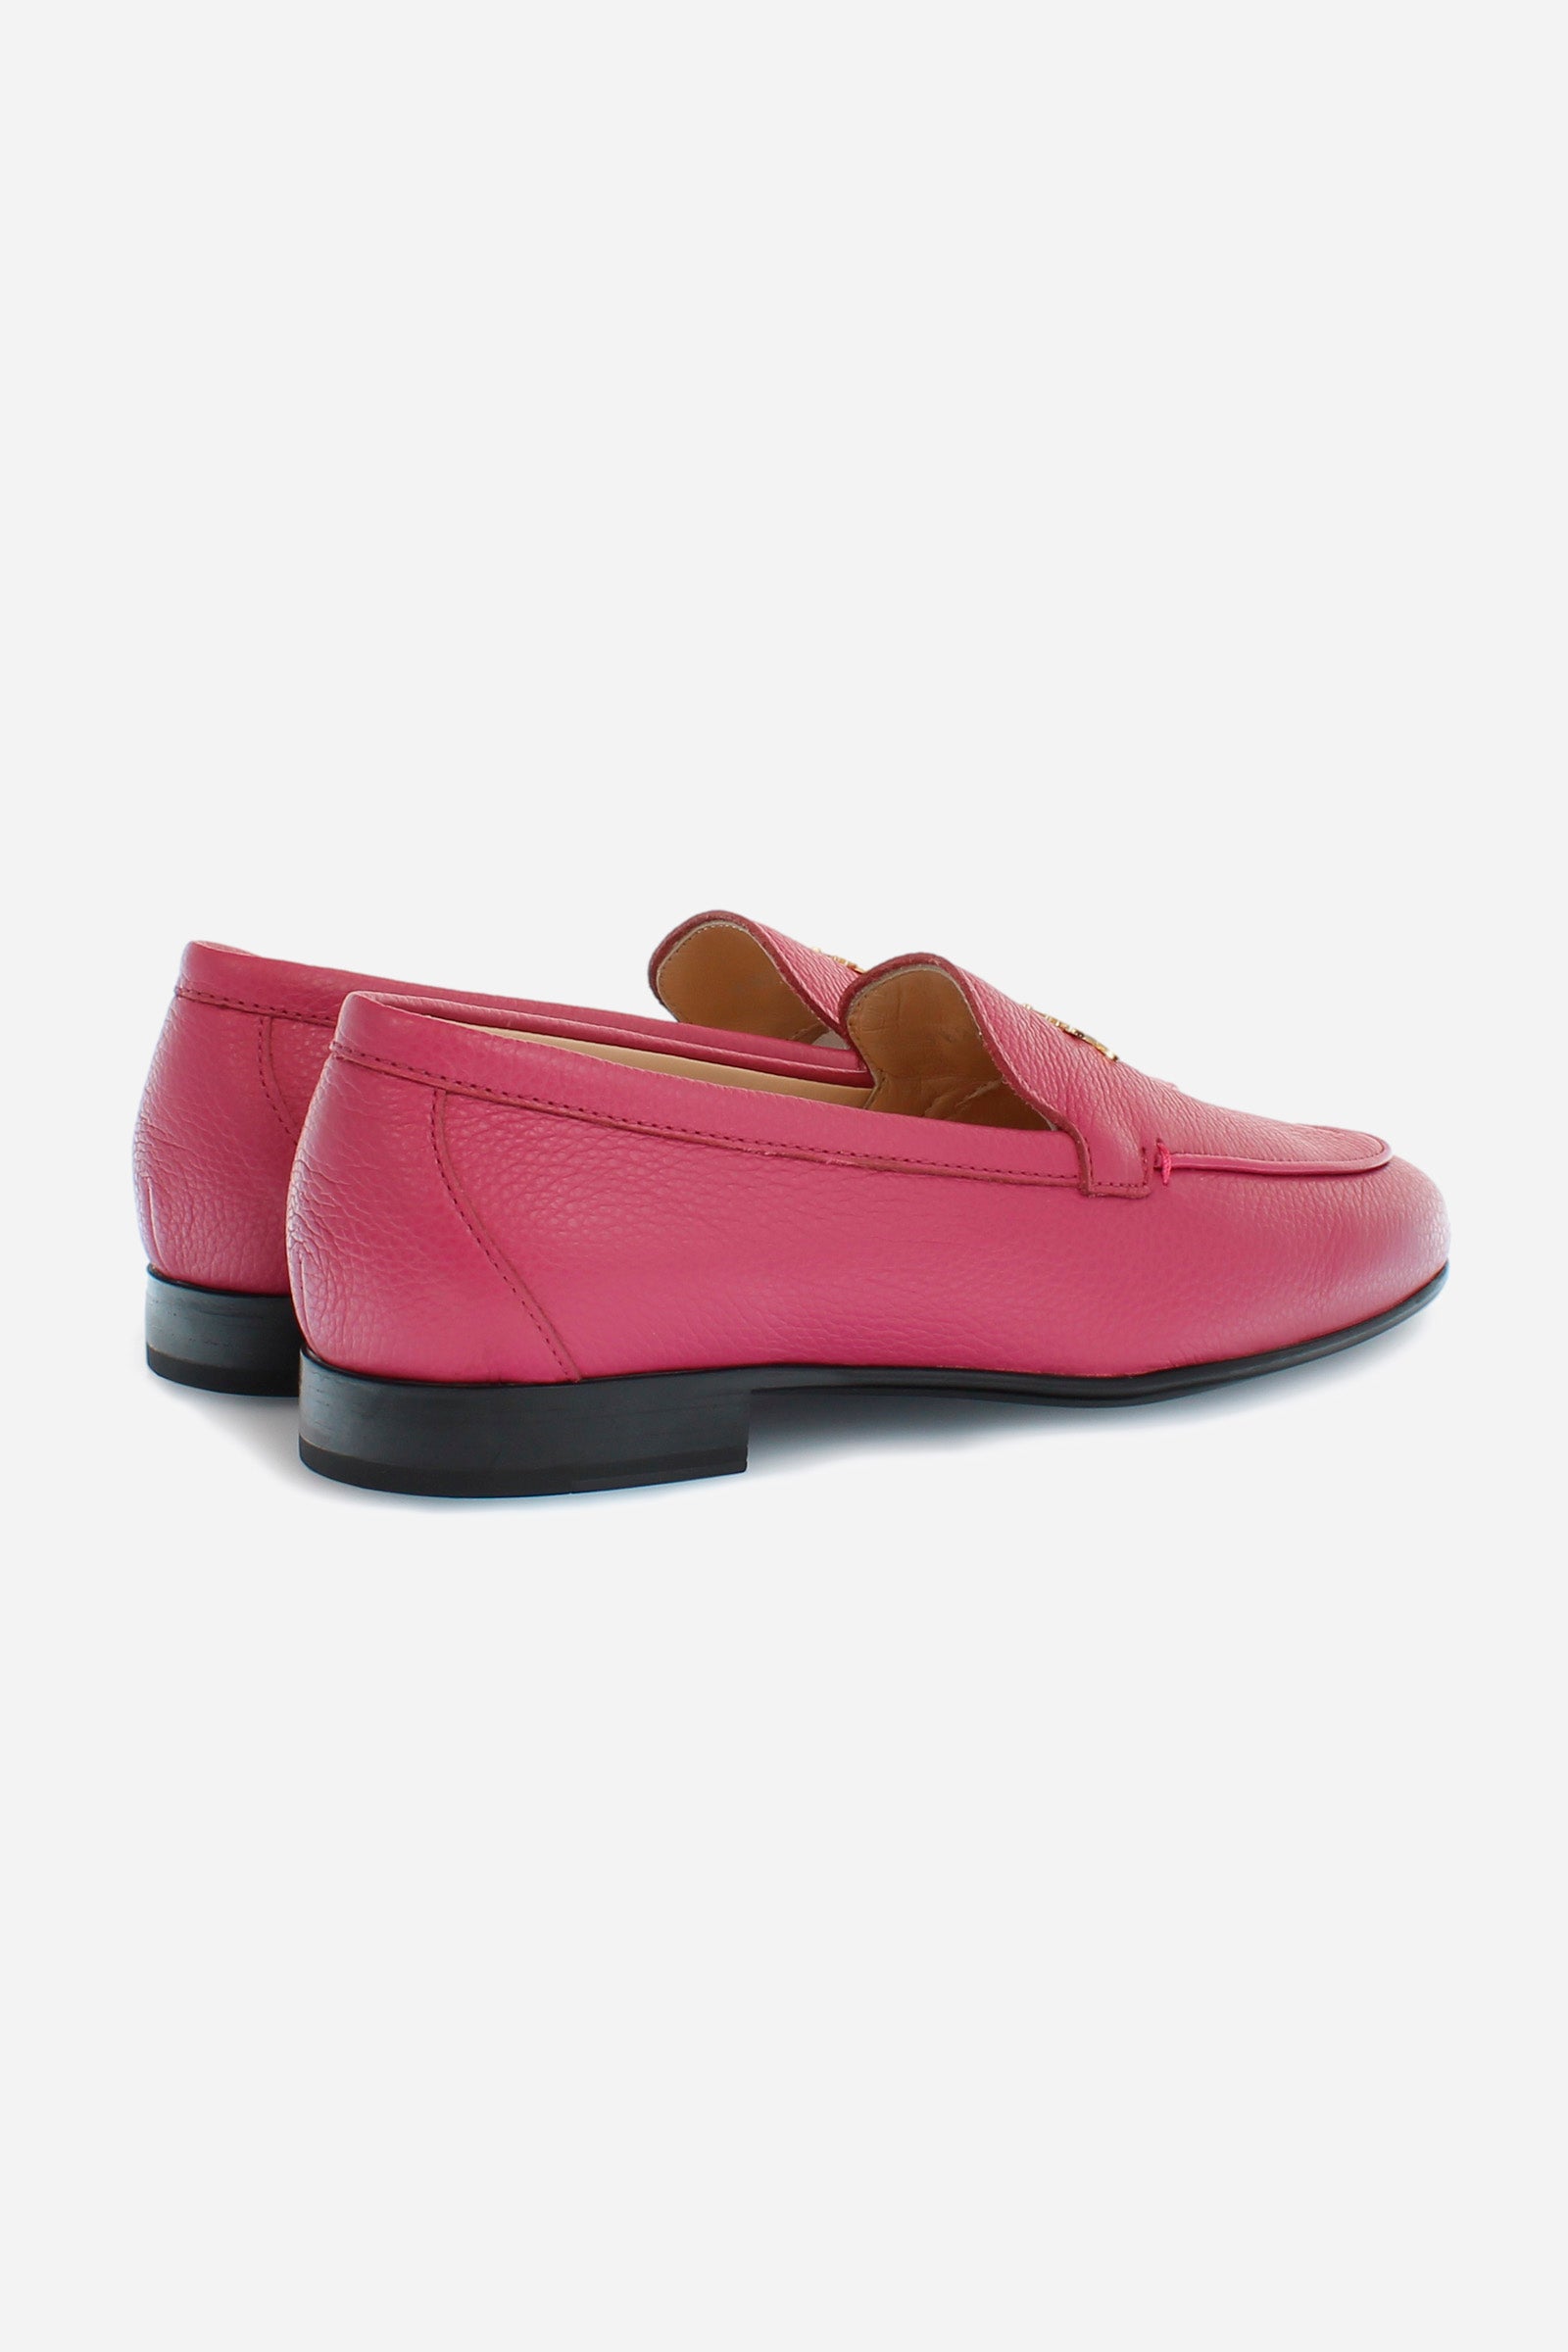 Women's leather loafers